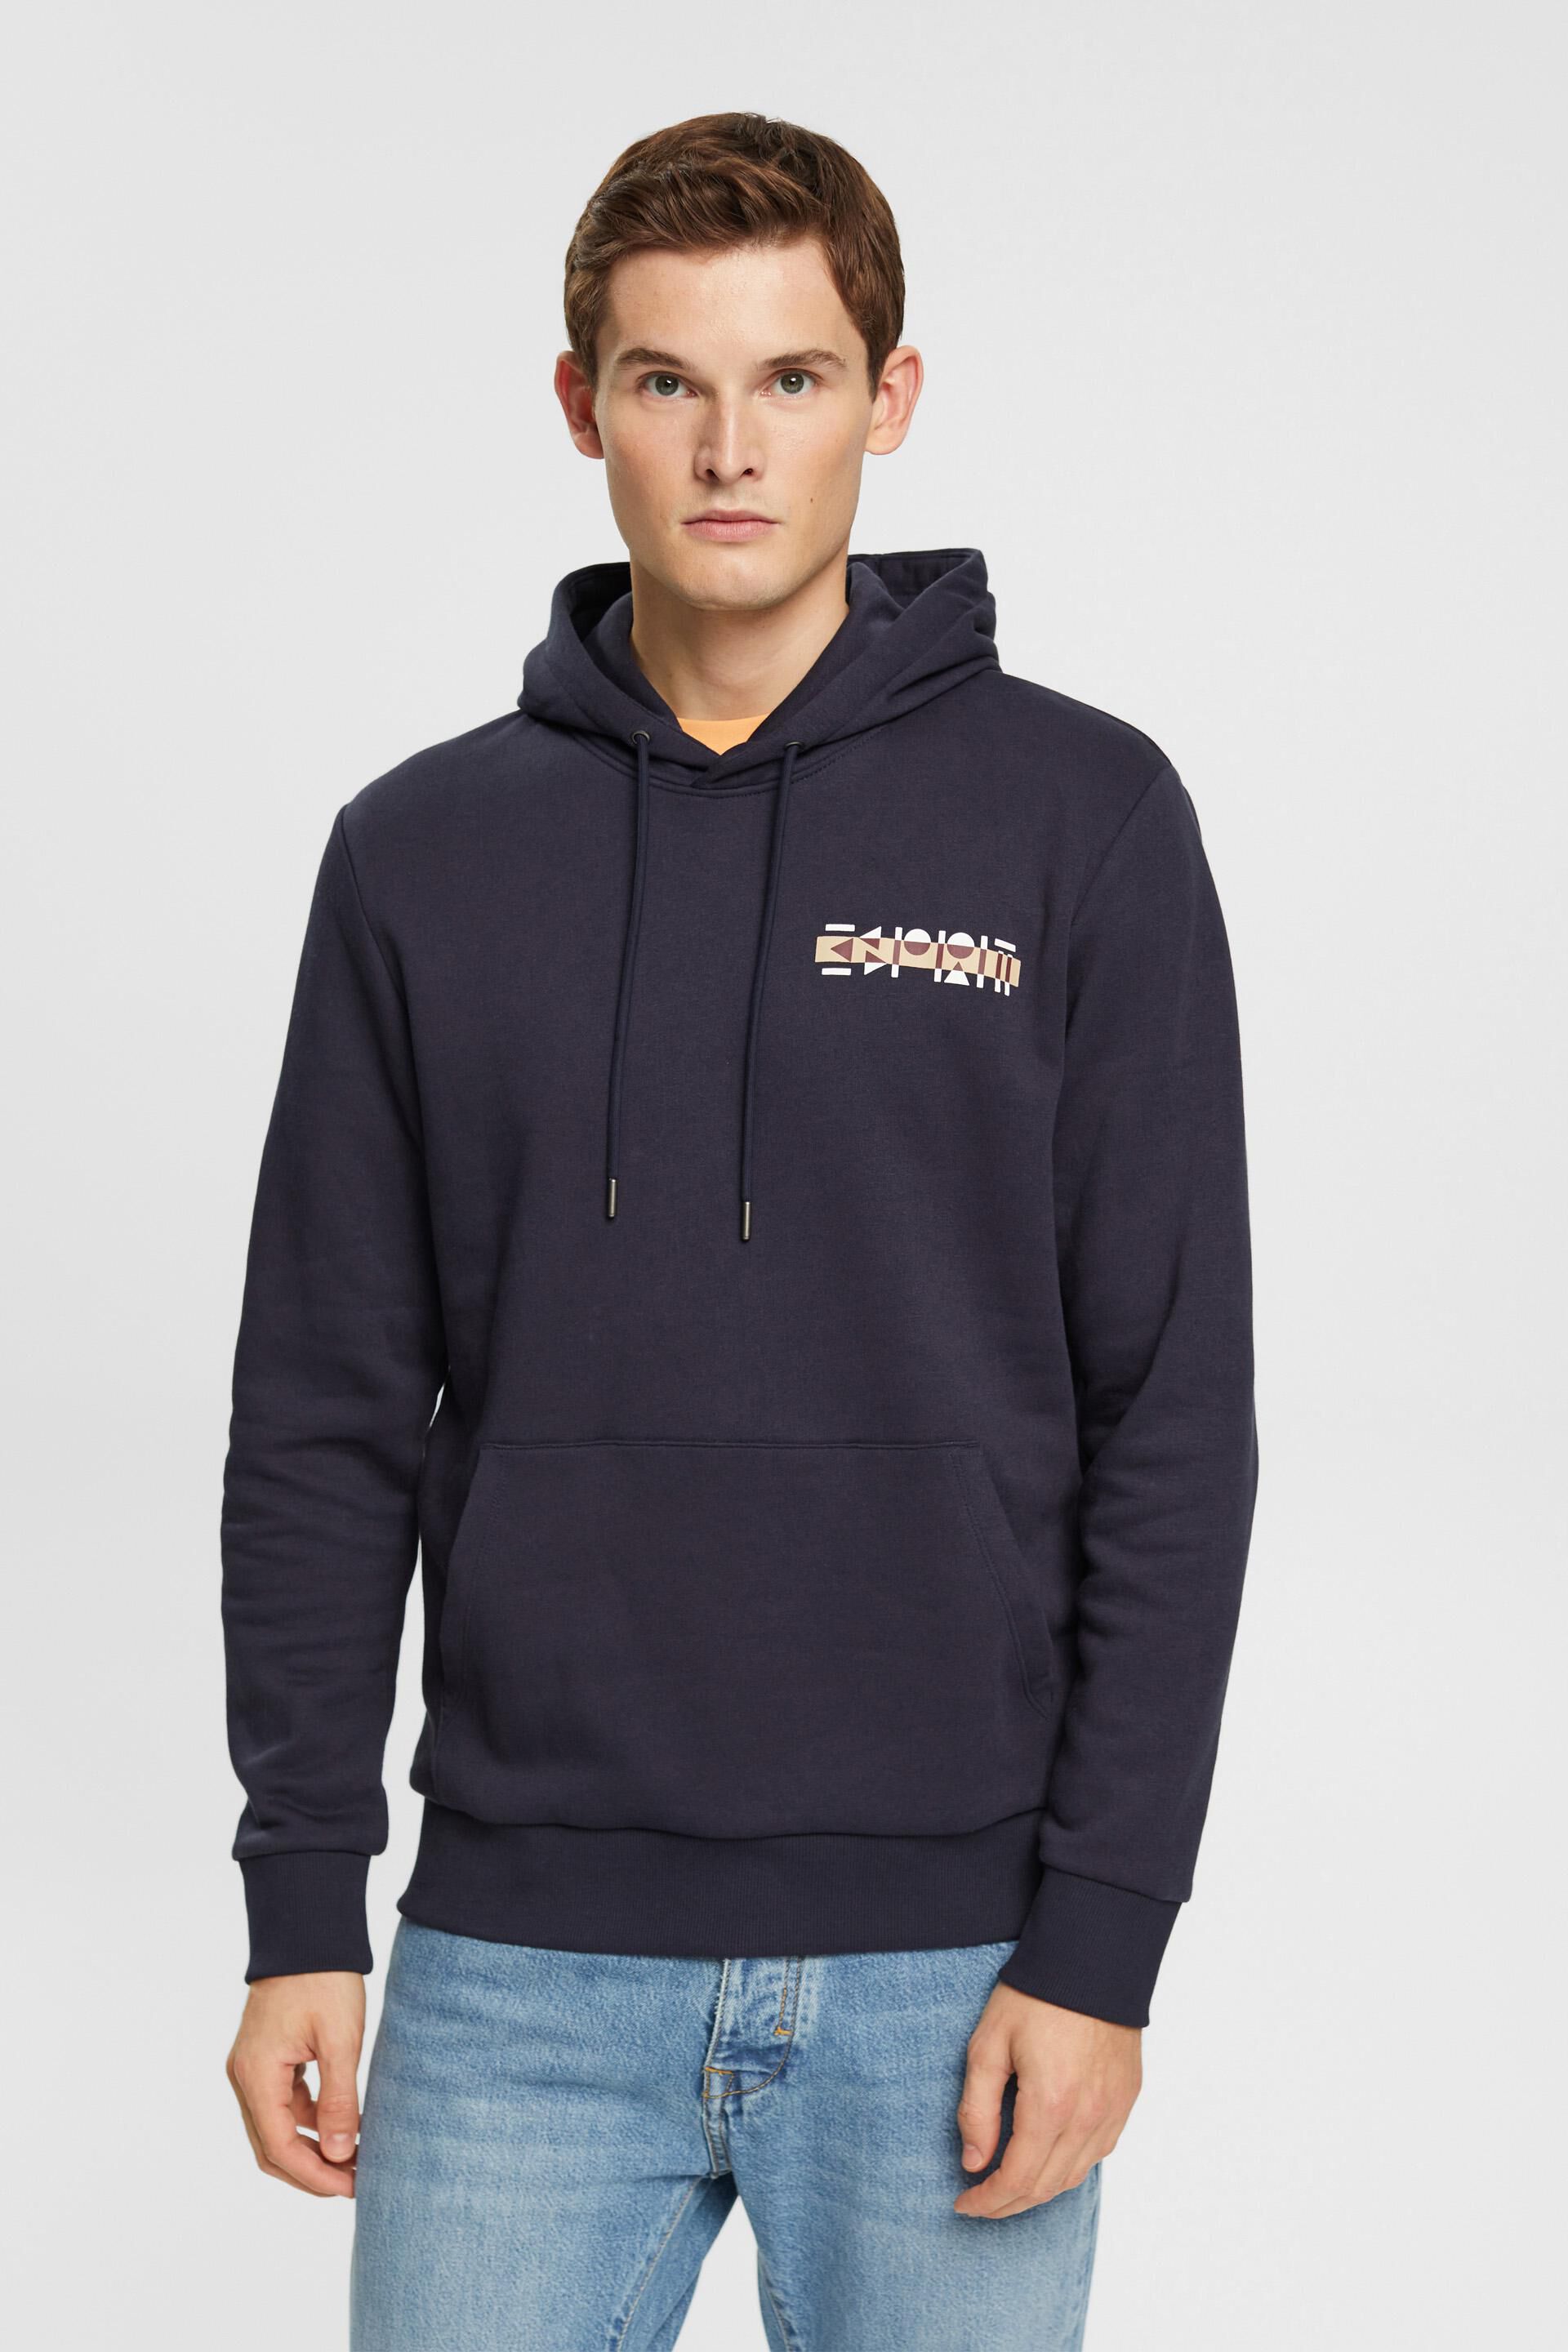 Esprit small Hoodie with logo print